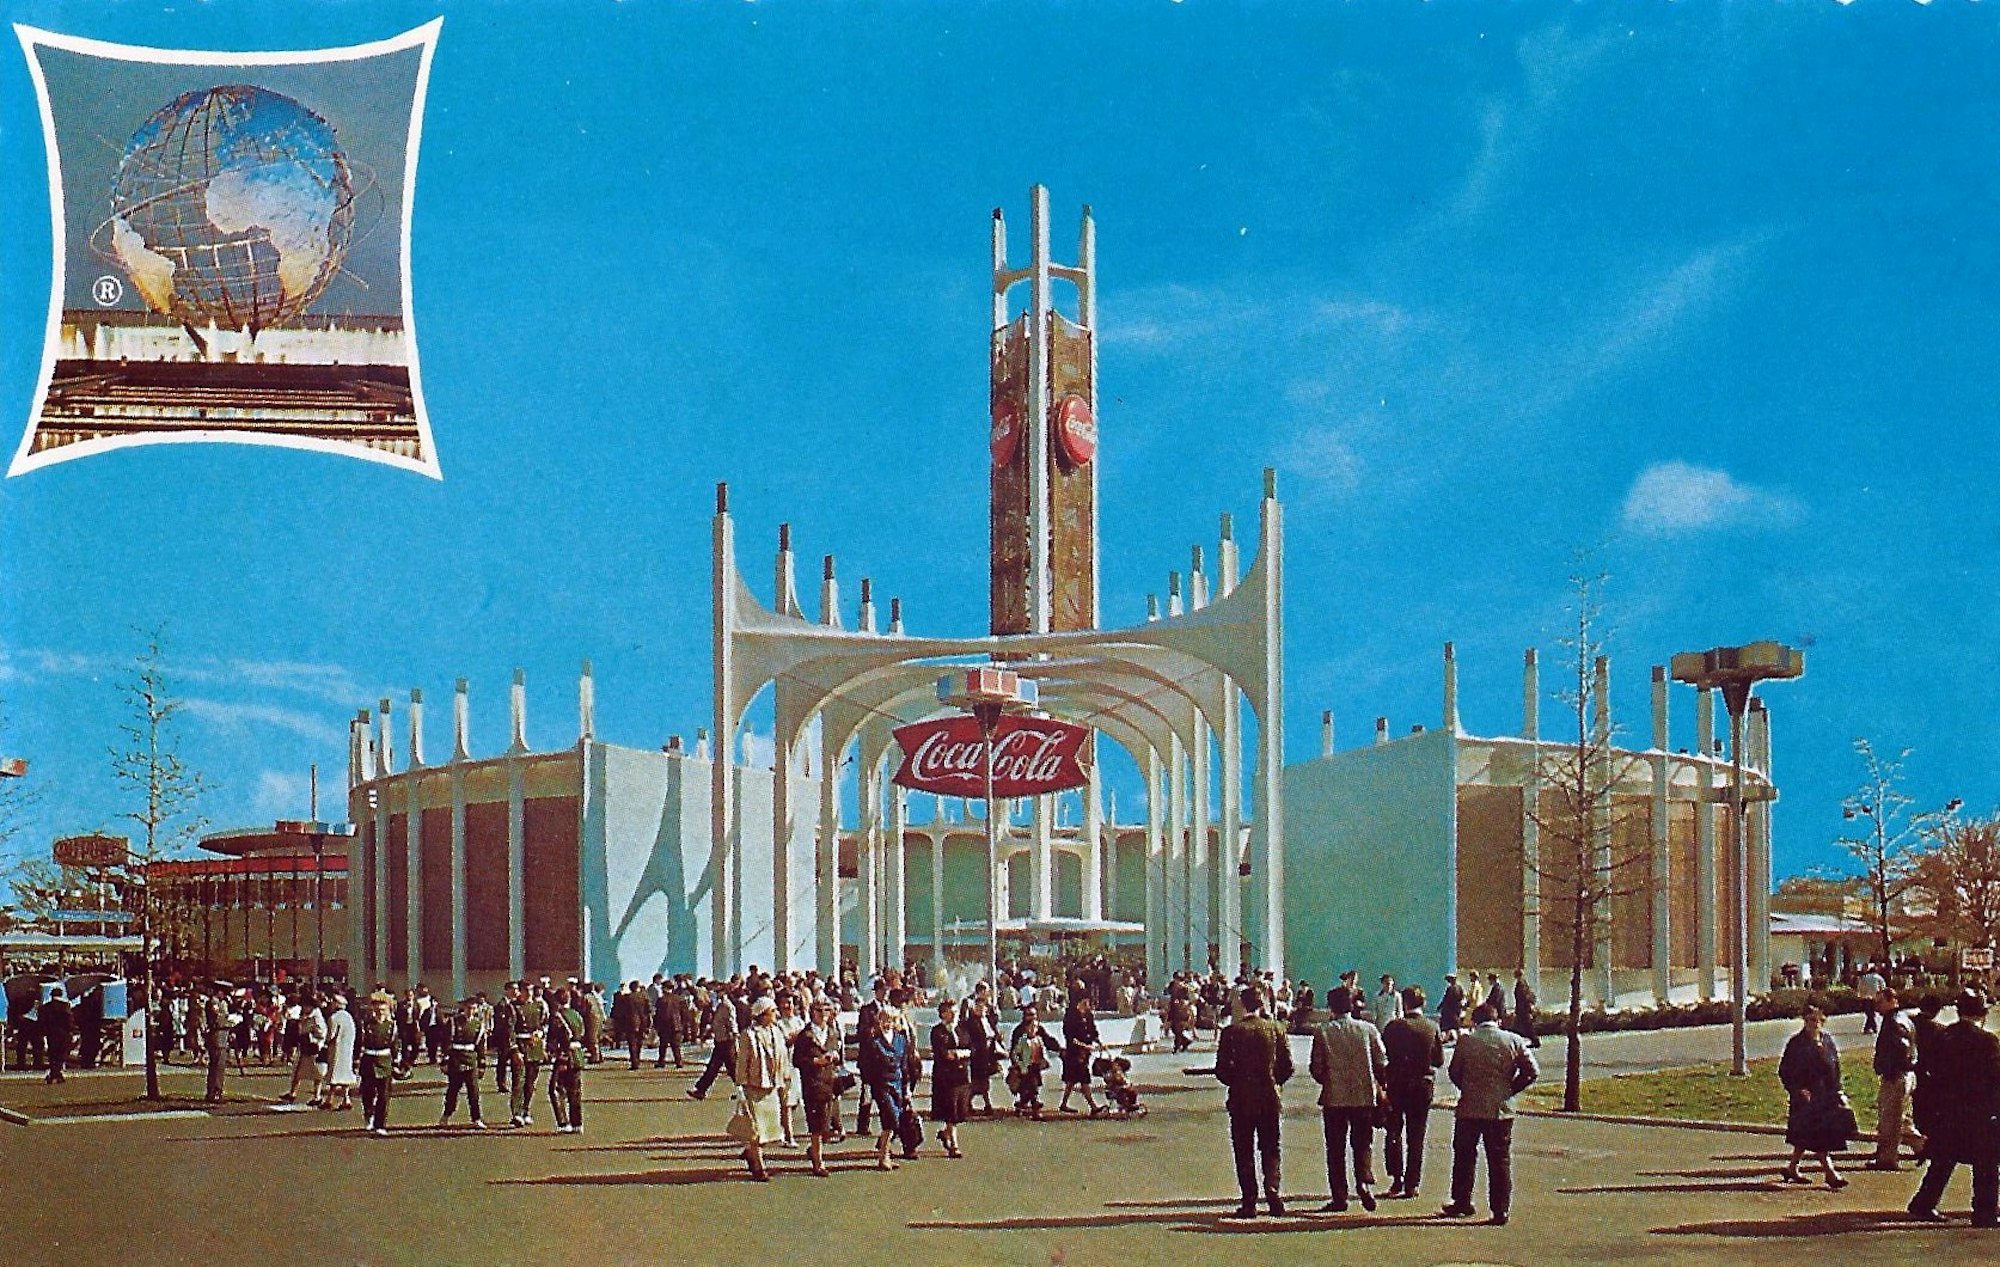 Then and Now Photos of the New York World's Fair Half a Century Later